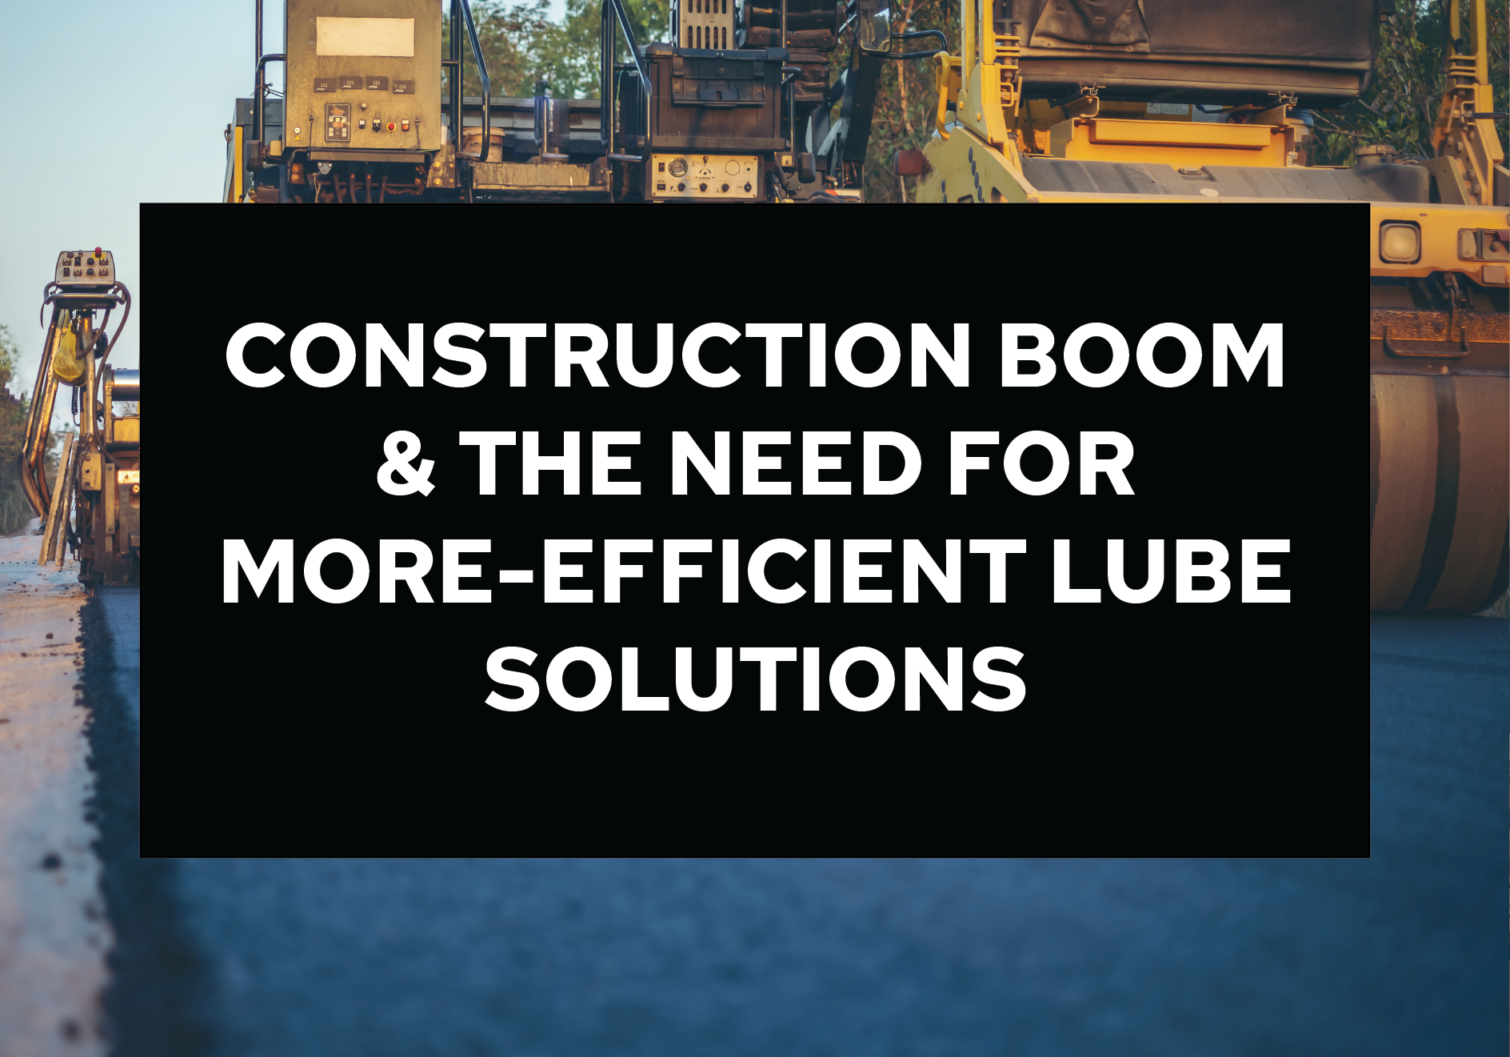 A picture of construction equipment with text that reads " construction boom & the need for more-efficient lube solutions ".